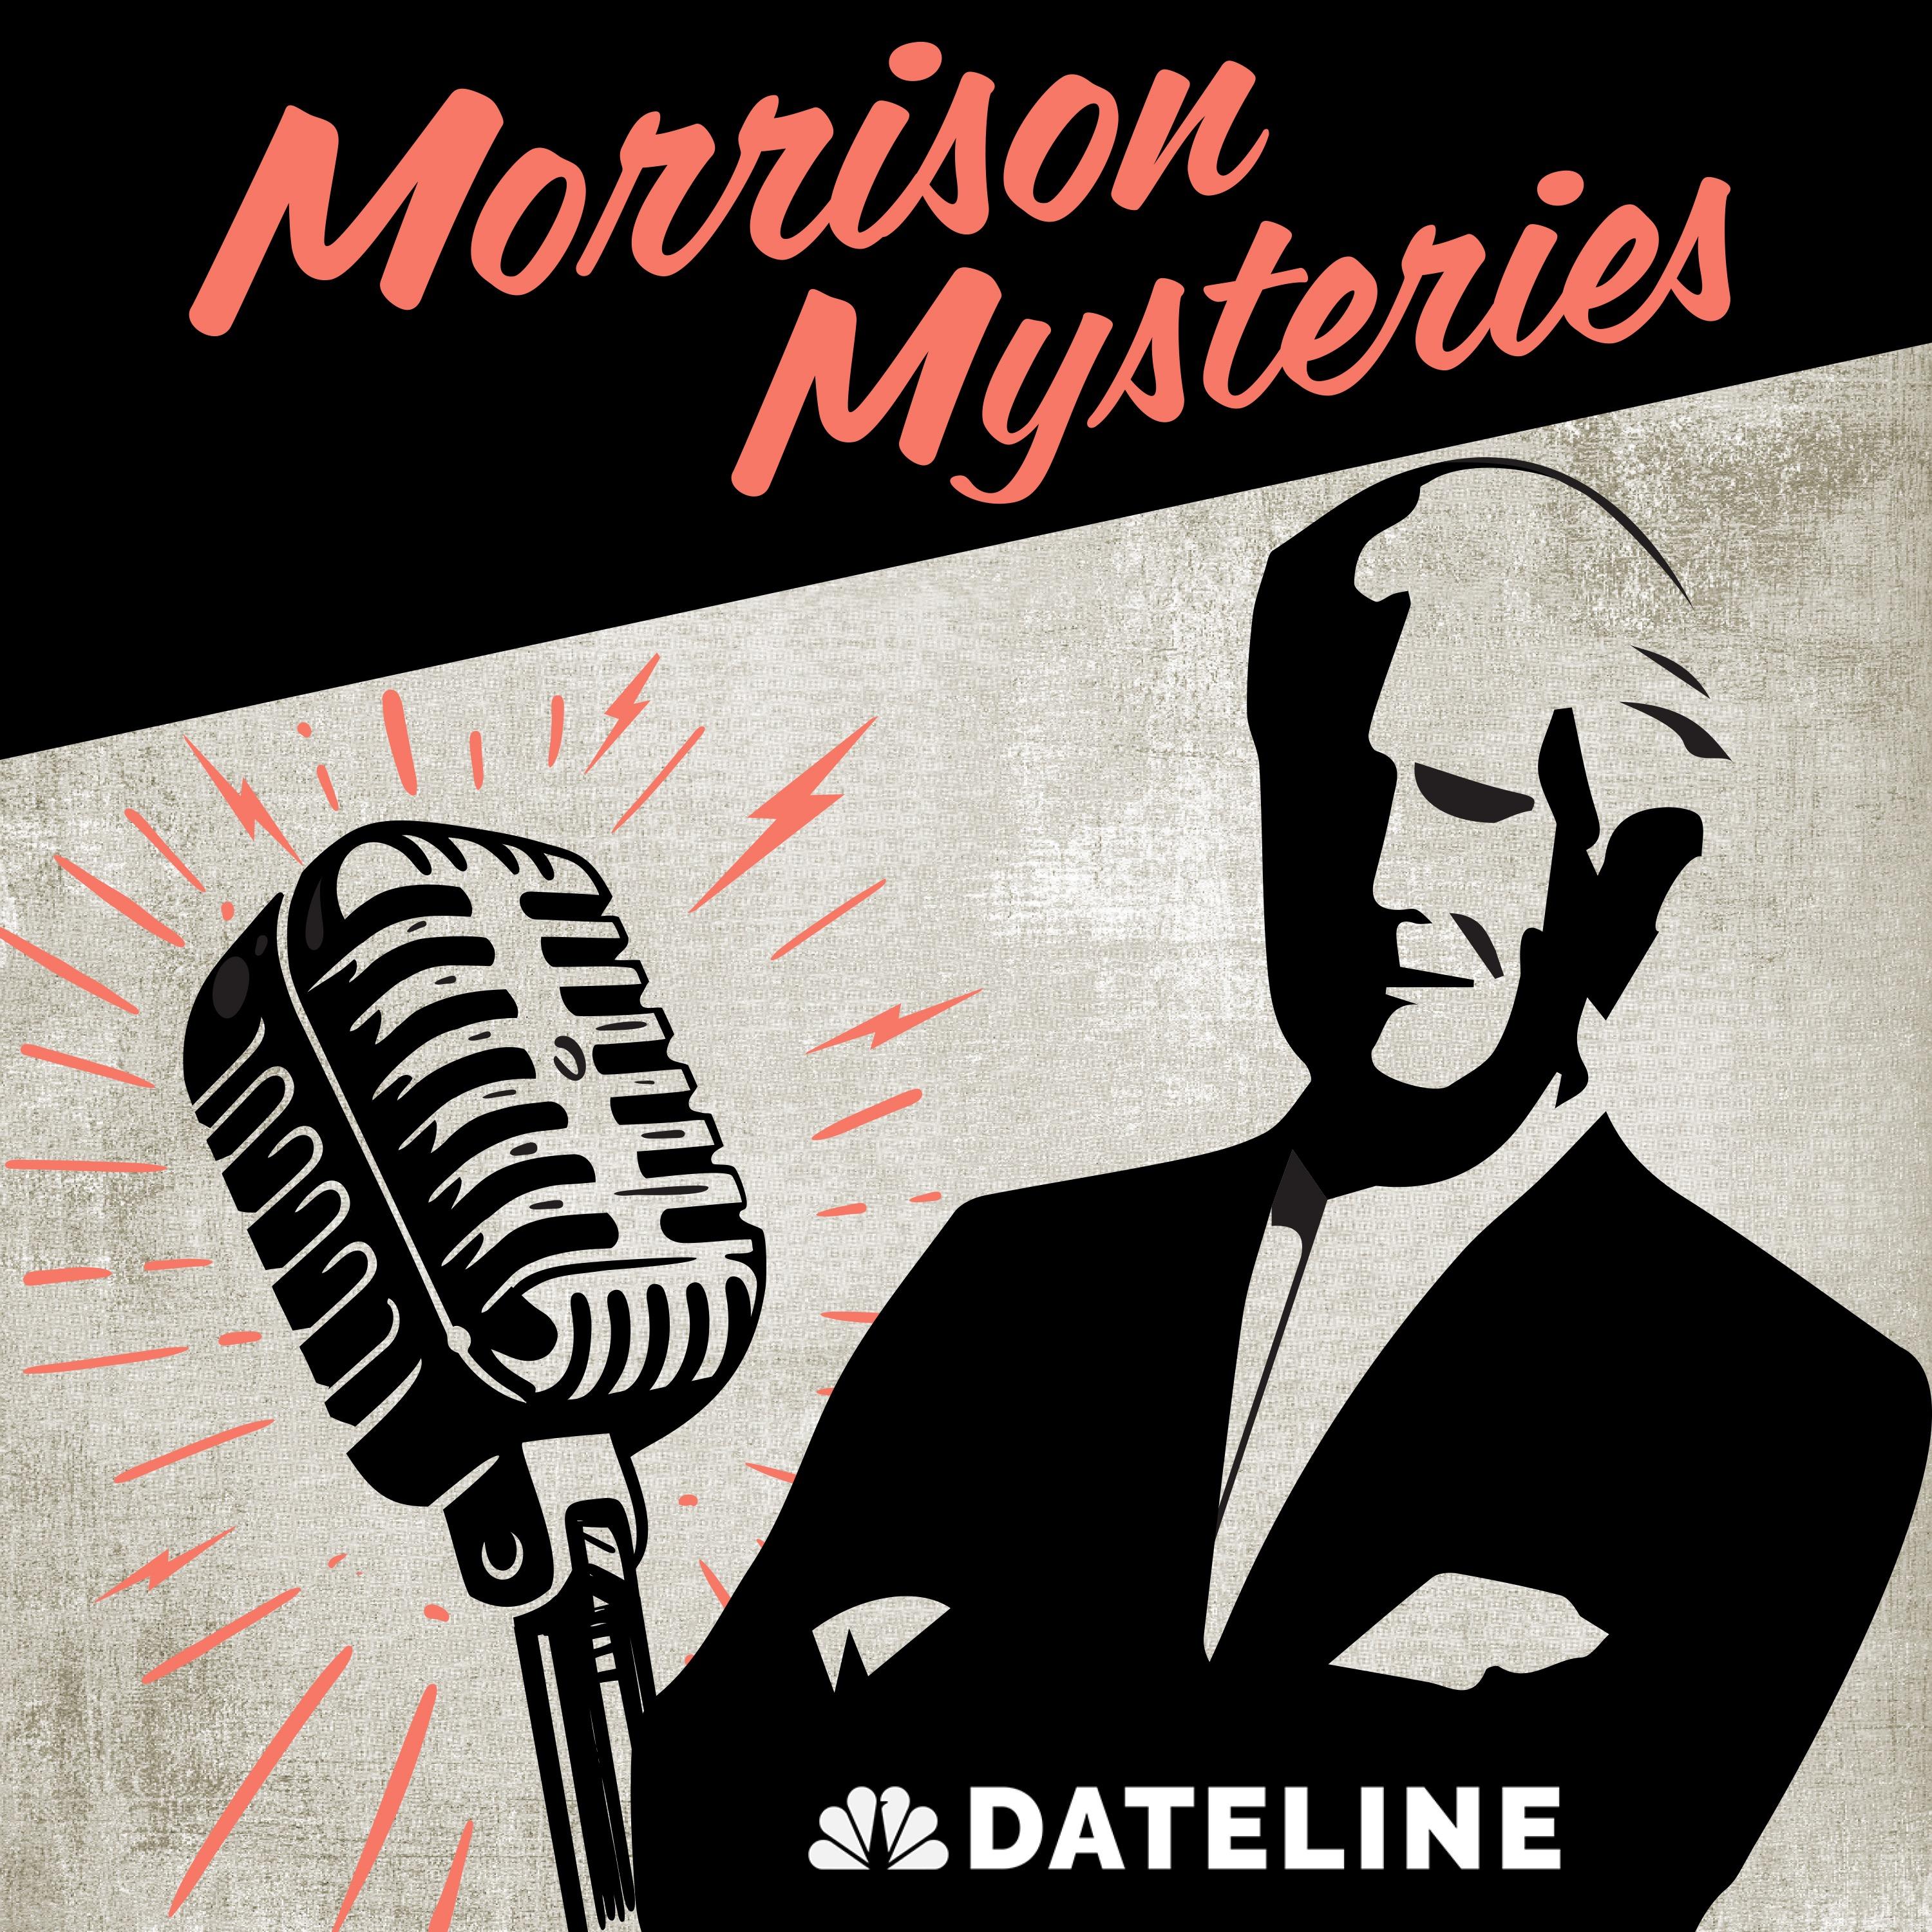 Show poster of Morrison Mysteries